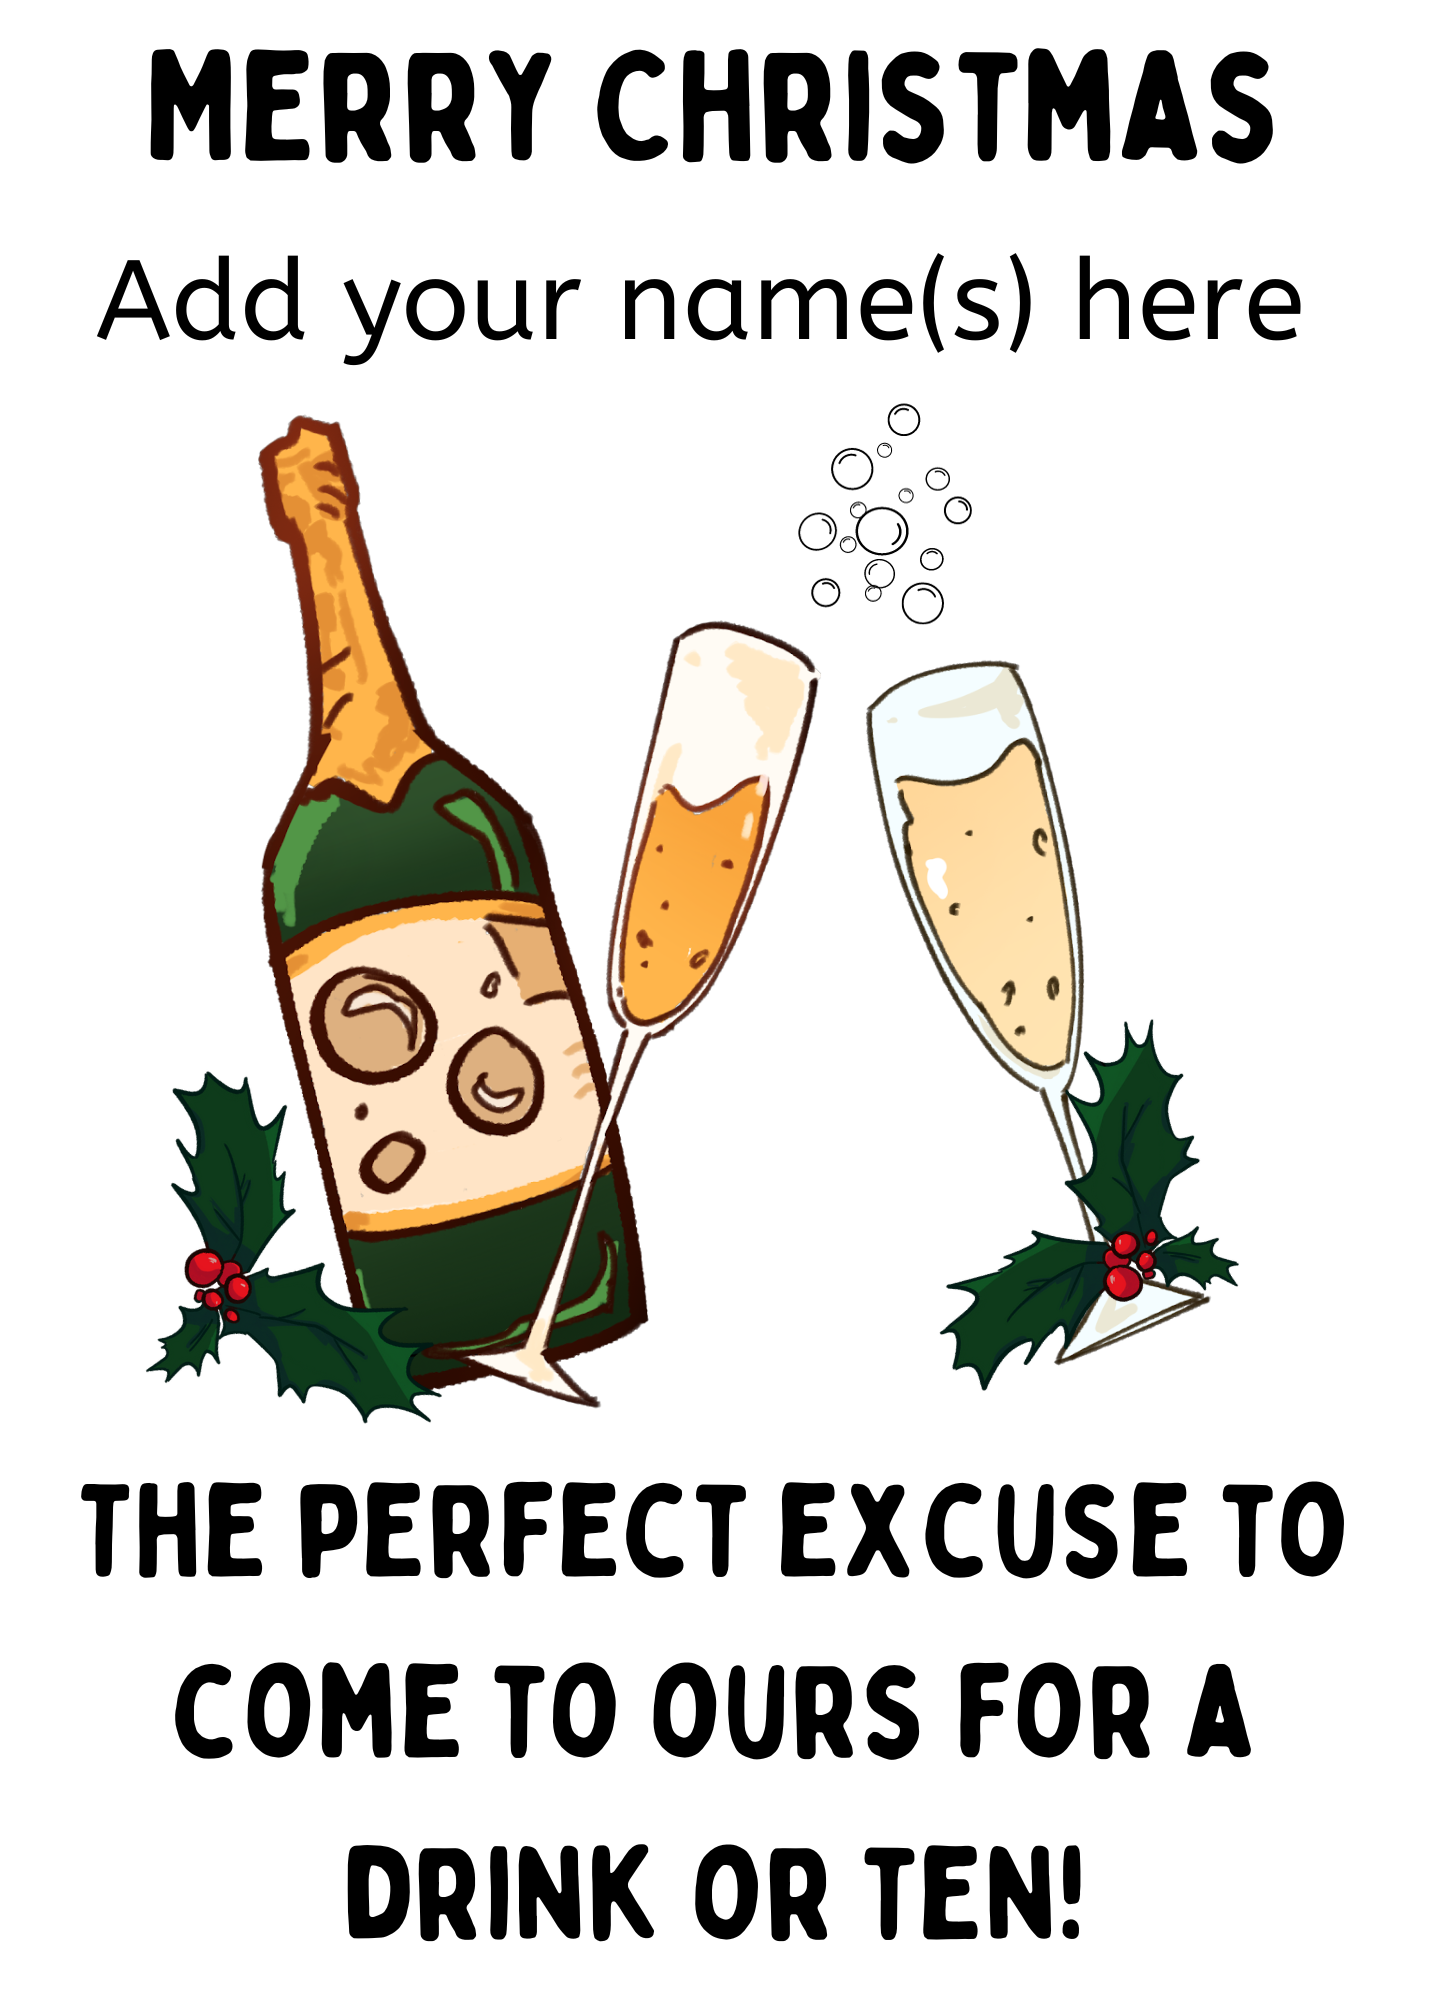 Personalised Christmas Card to send to Special Friends to invite them for a drink this festive season